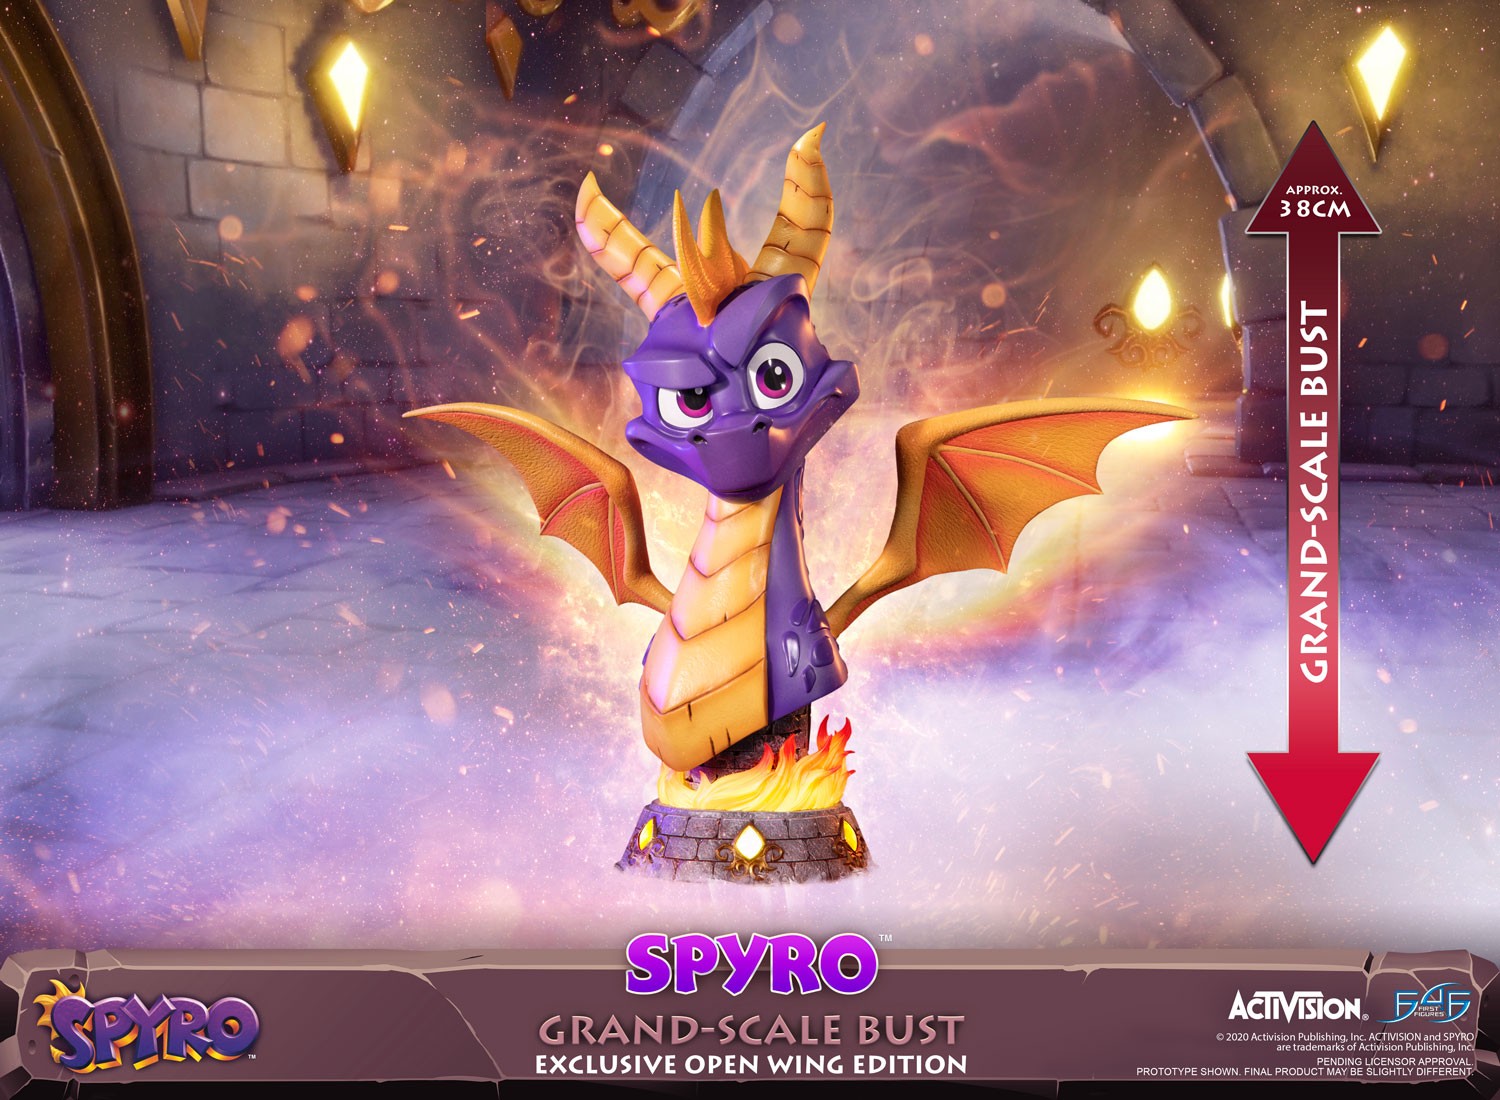 Spyro™ the Dragon – Spyro™ Grand-Scale Bust (Exclusive Open Wing Edition)